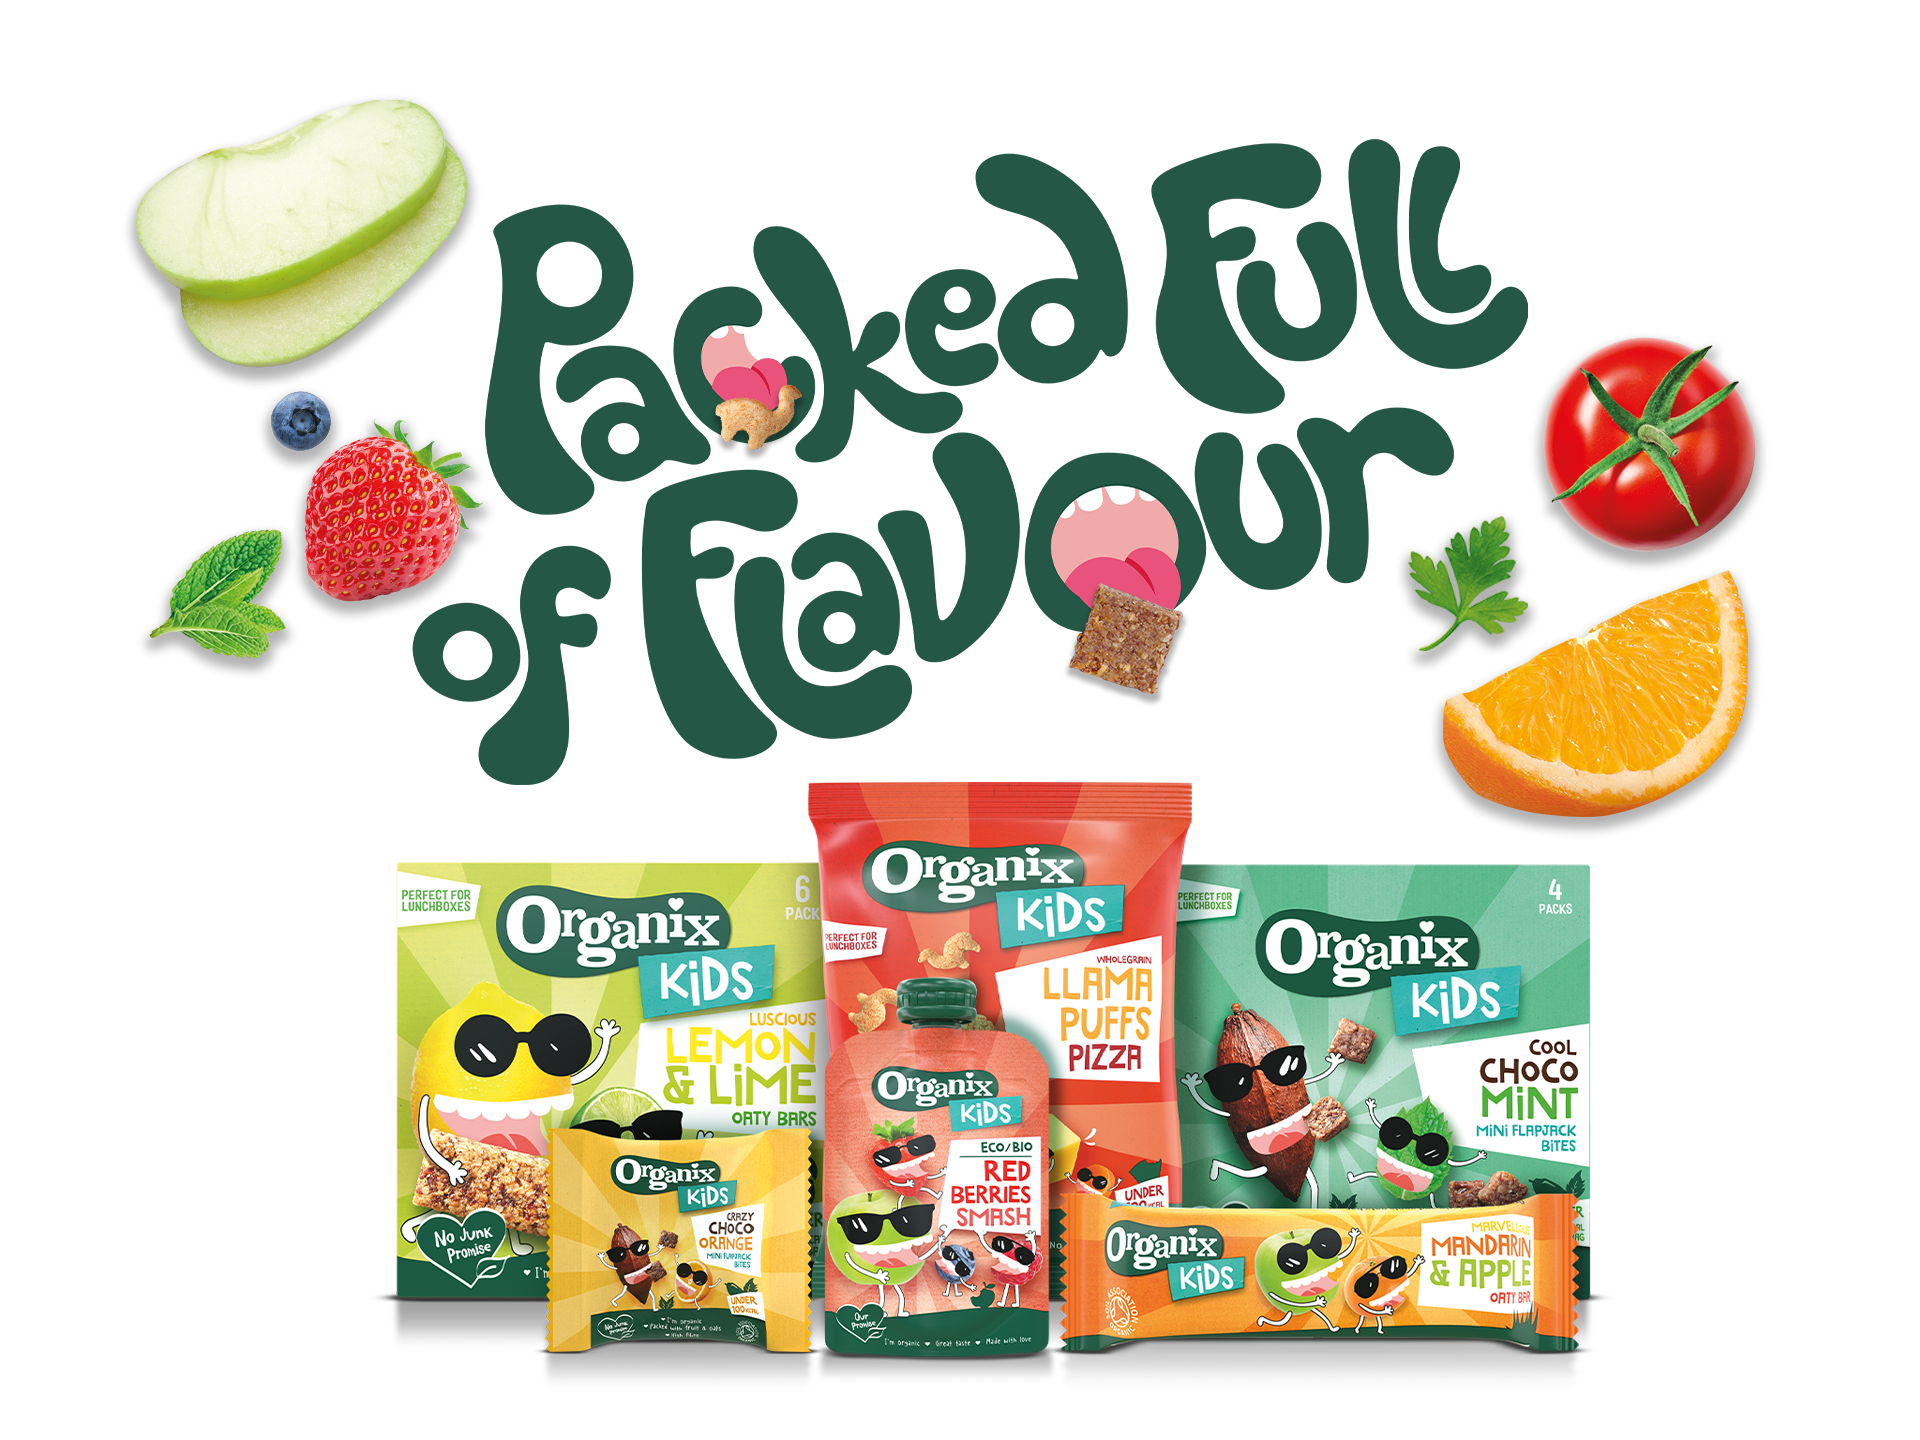 Organix Kids Snacks in a group shot surrounded by fruit, vegetables and snack bites